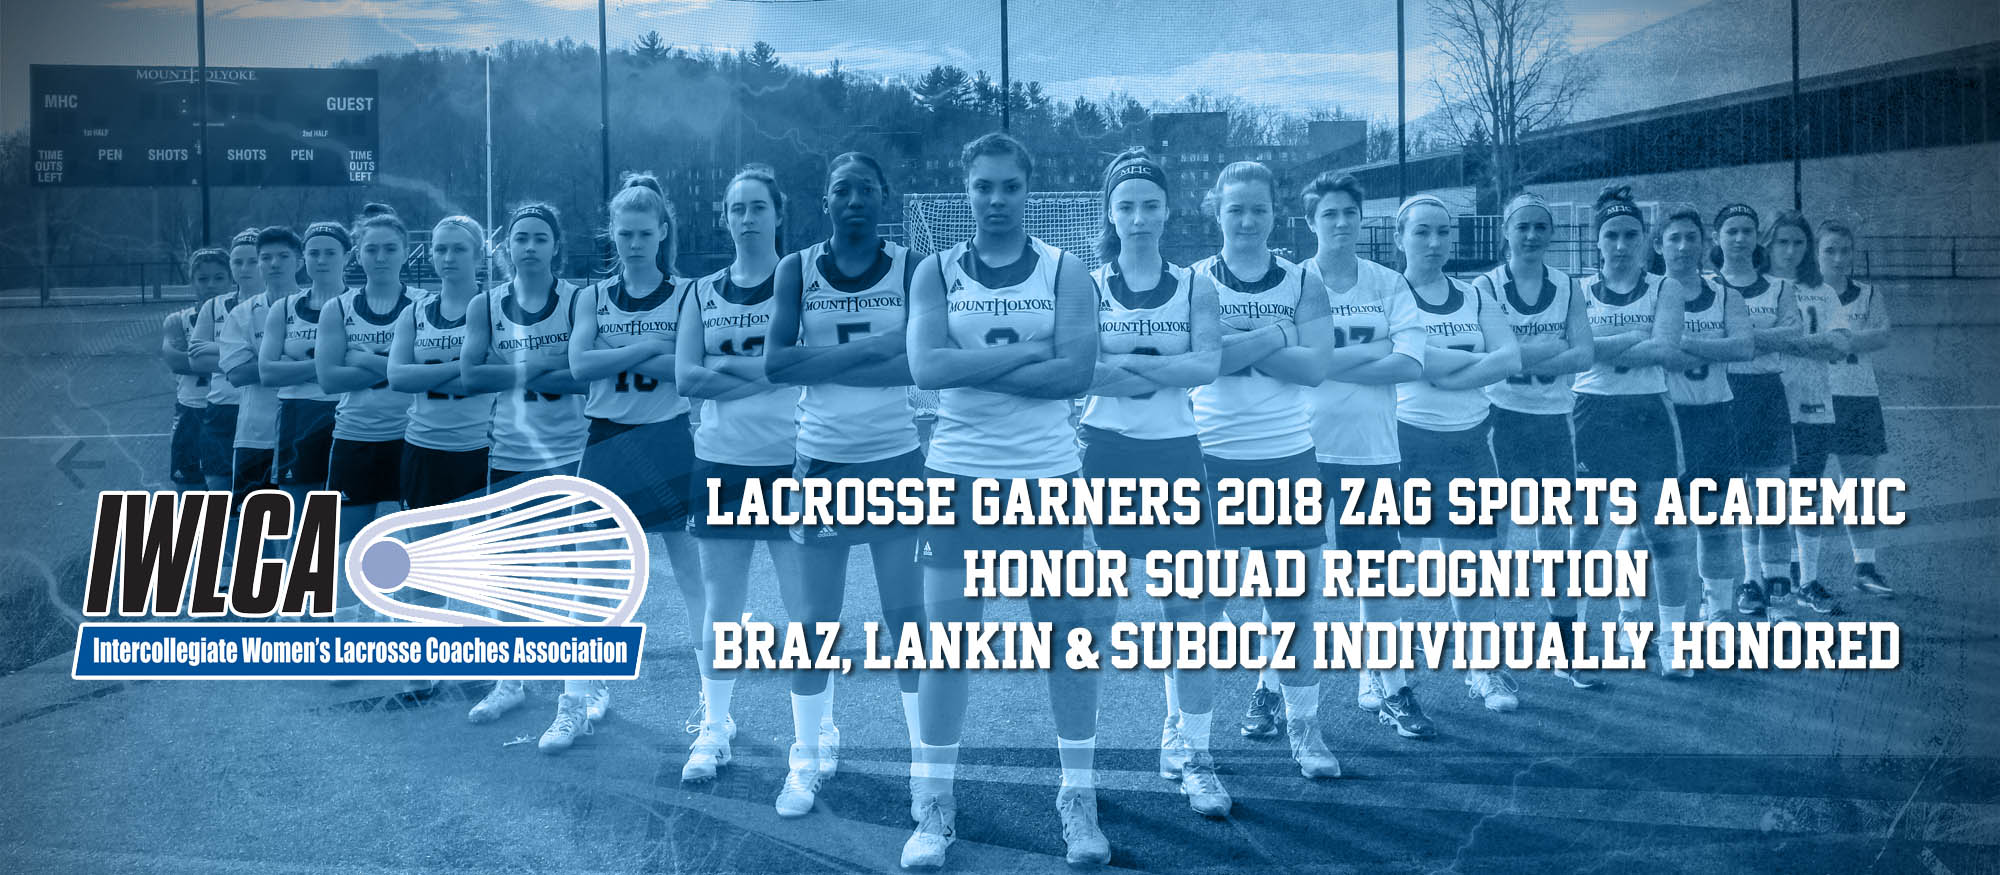 Photo of the 2018 Lyons Lacrosse Team, which was named a 2018 IWLCA/Zag Sports Academic Honor Squad for their work in the classroom.